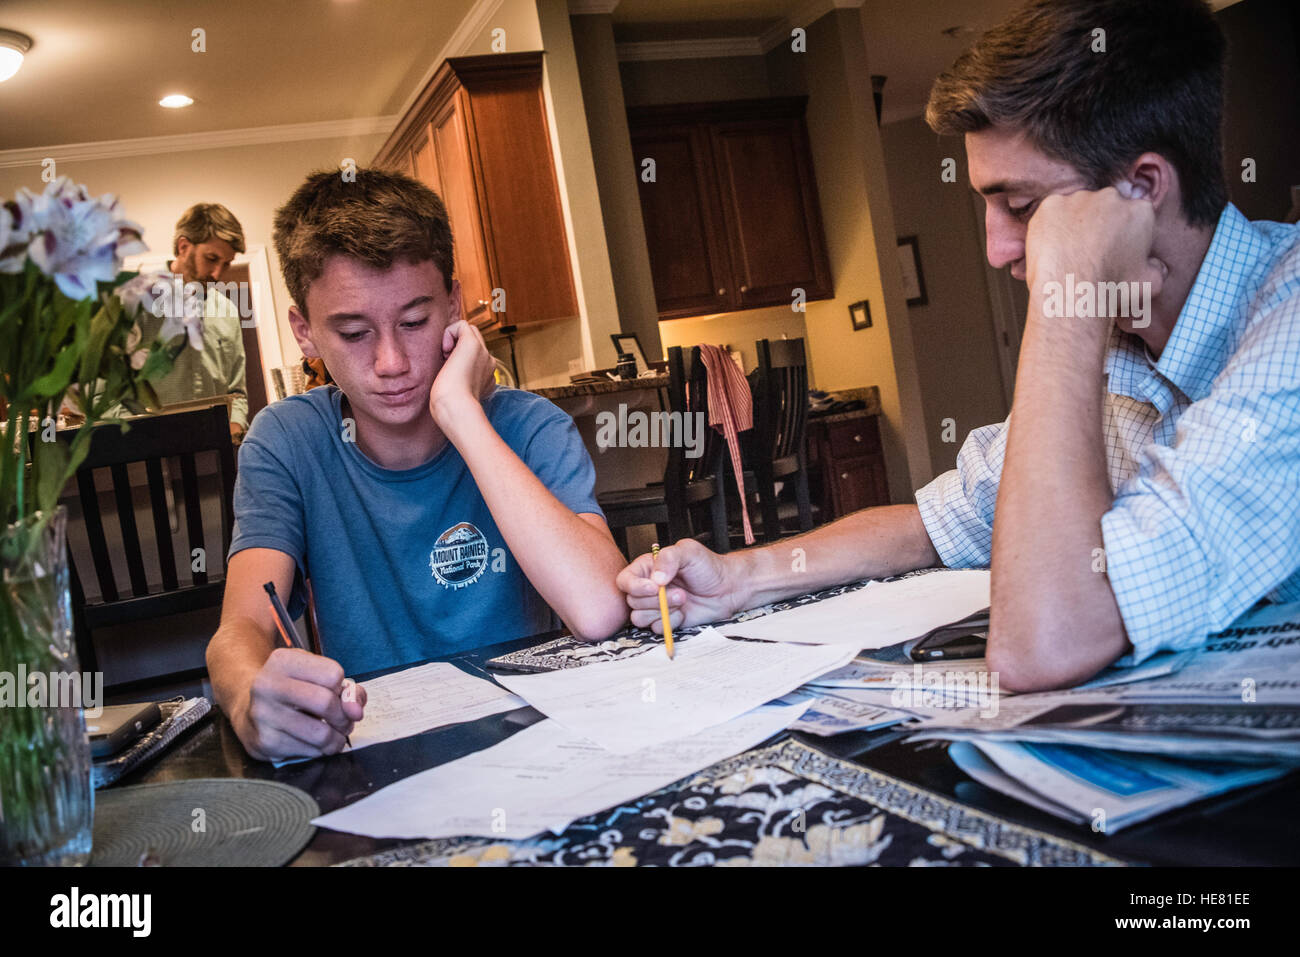 Two brothers confer over homework at kitchen table. Stock Photo